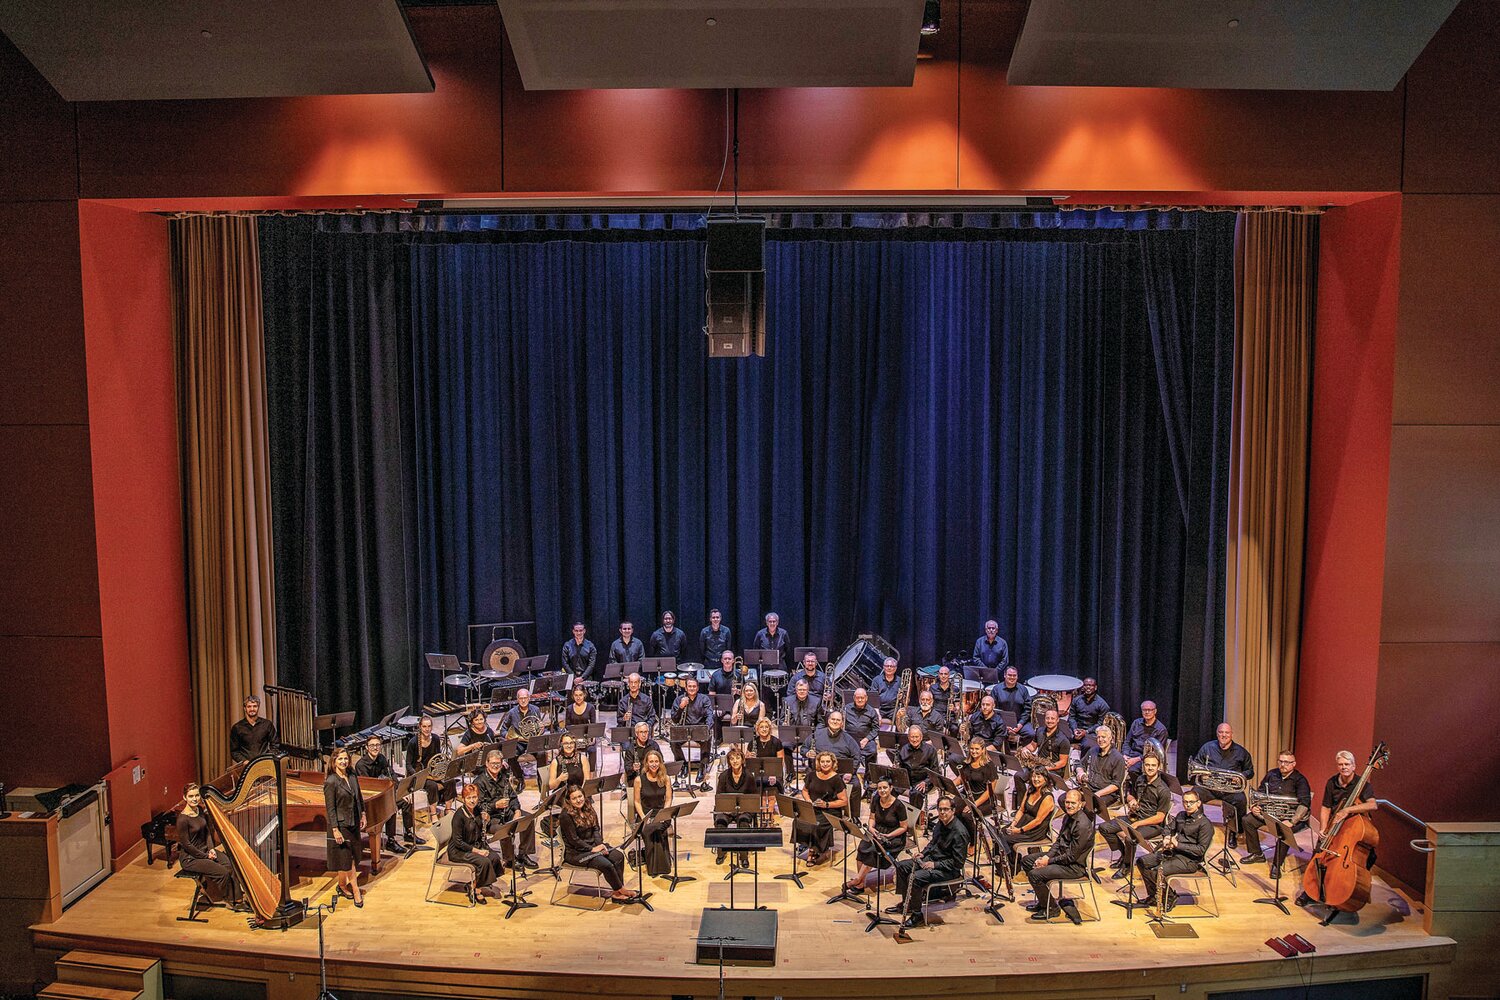 The Doylestown Symphonic Winds is playing a free concert at 7:30 p.m. July 28 at Lenape Valley Presbyterian Church in New Britain.